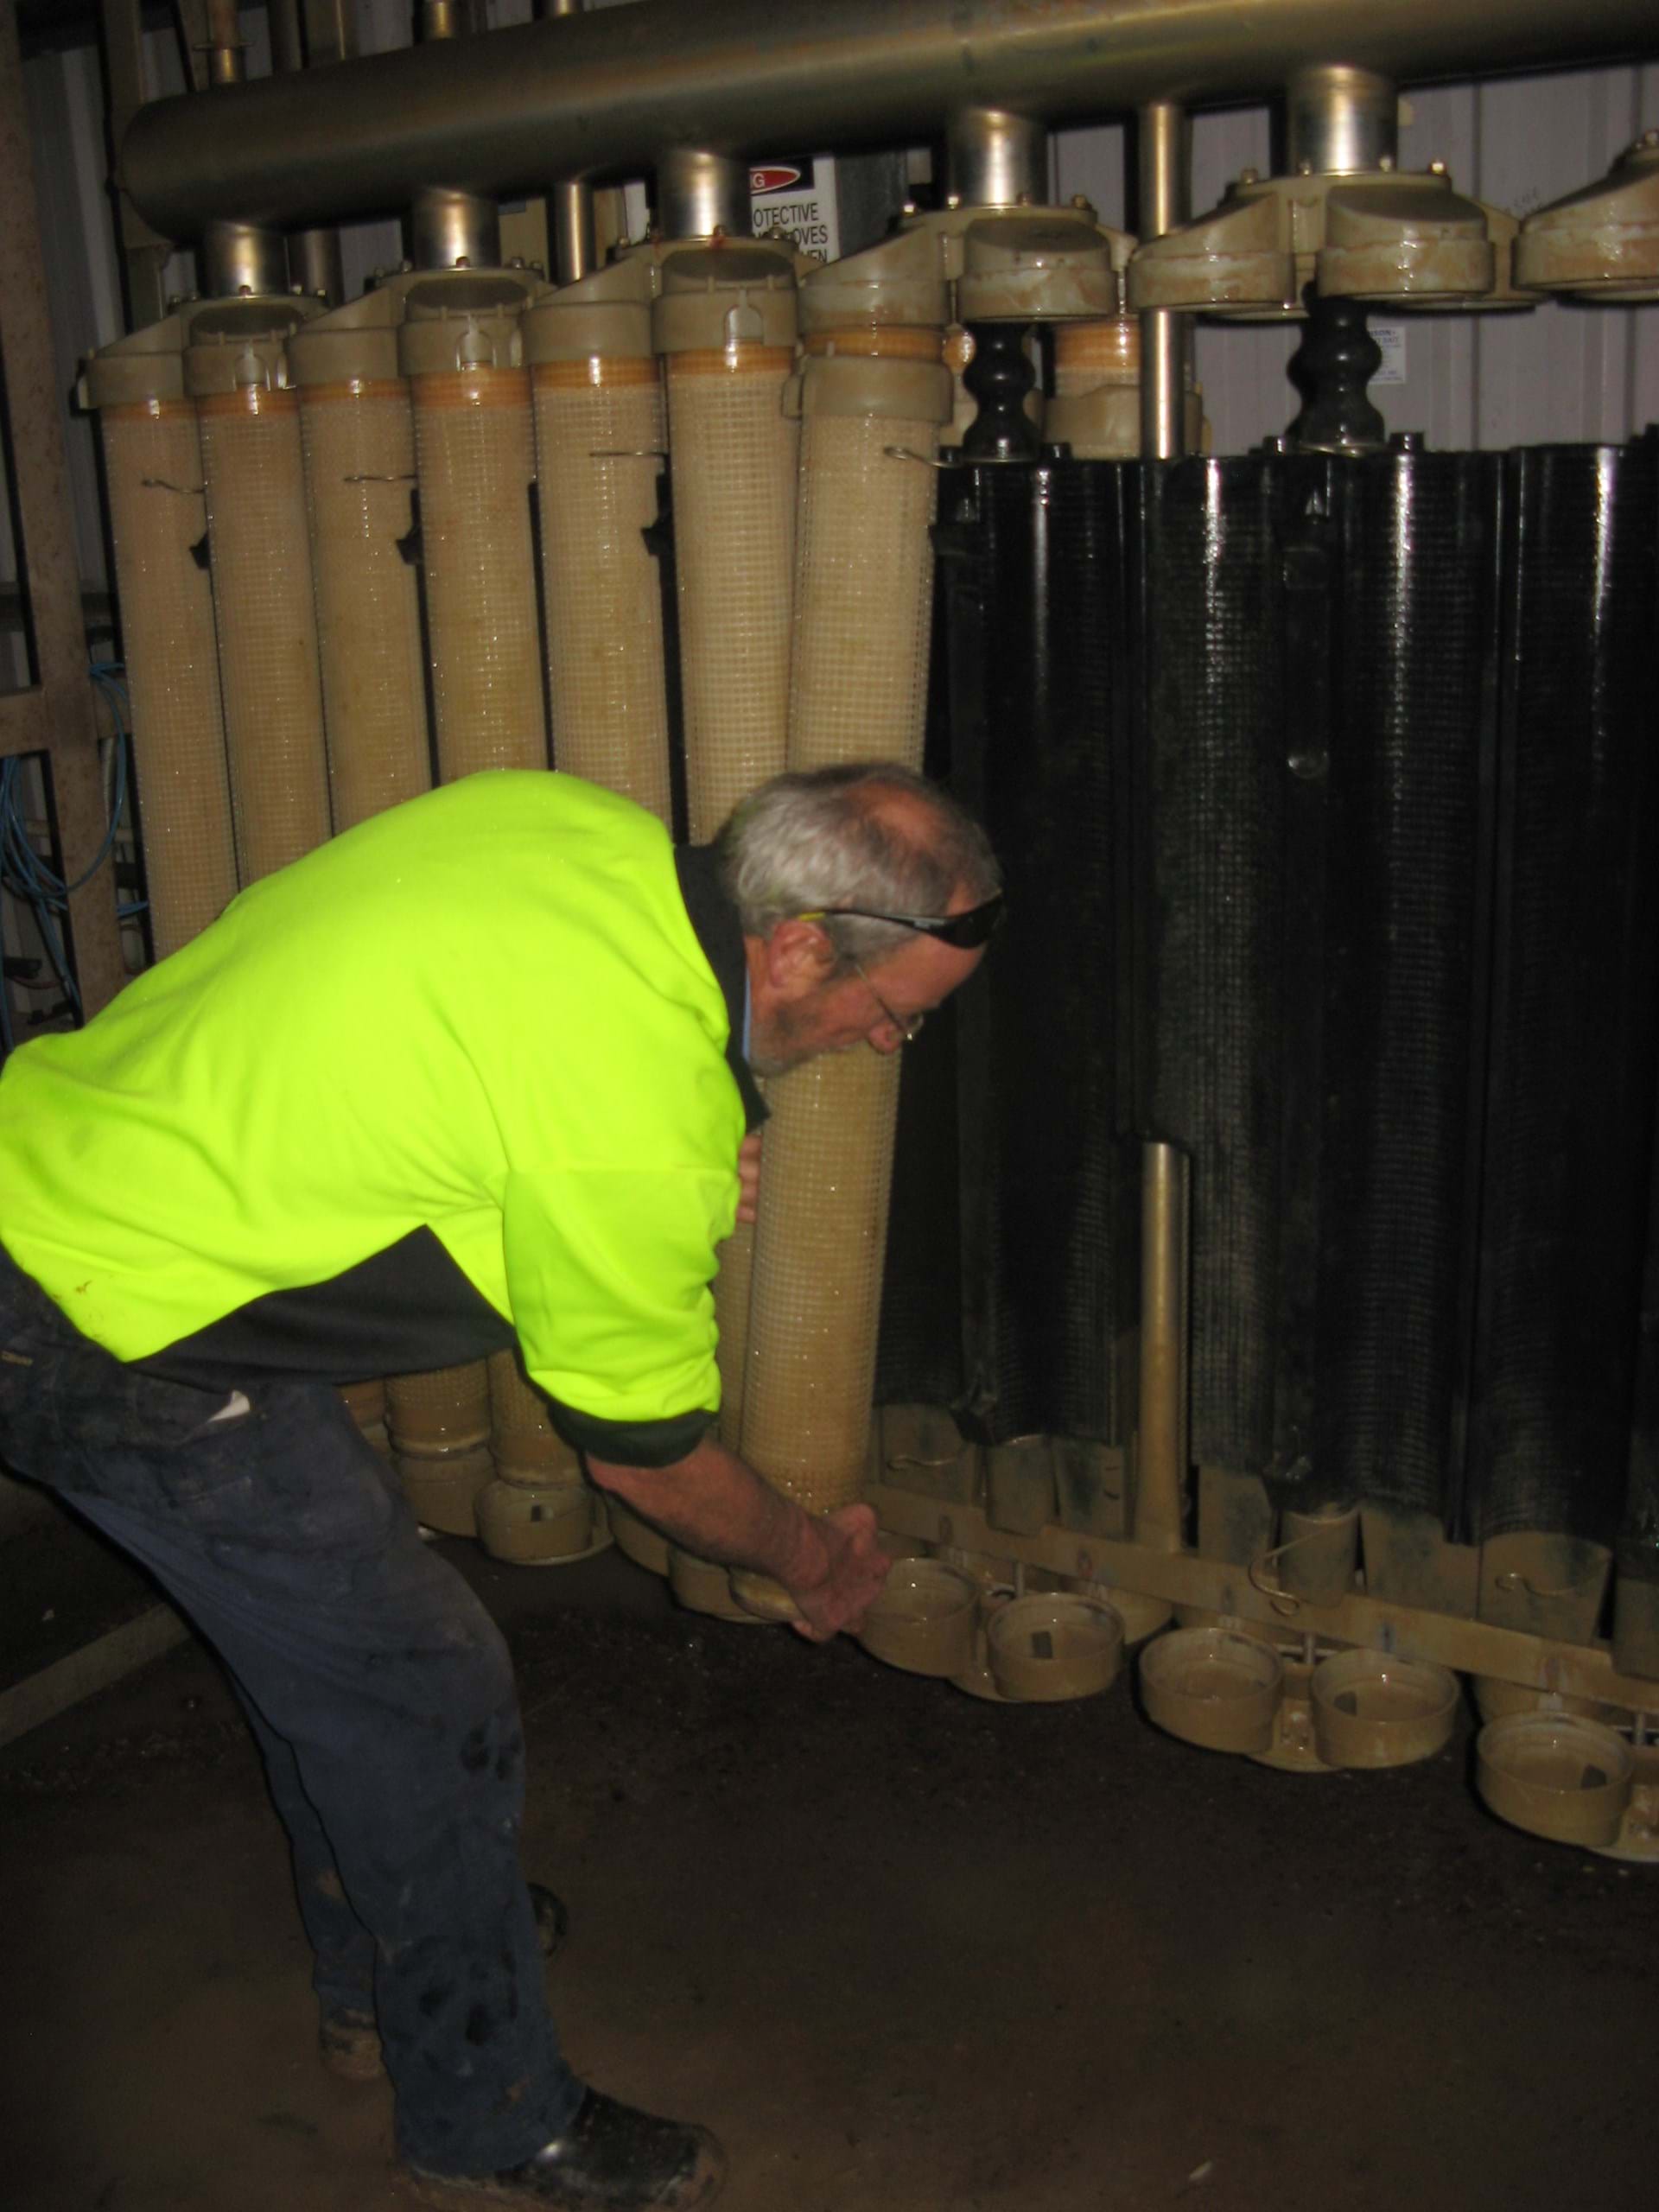 Removing membranes for inspection during a service